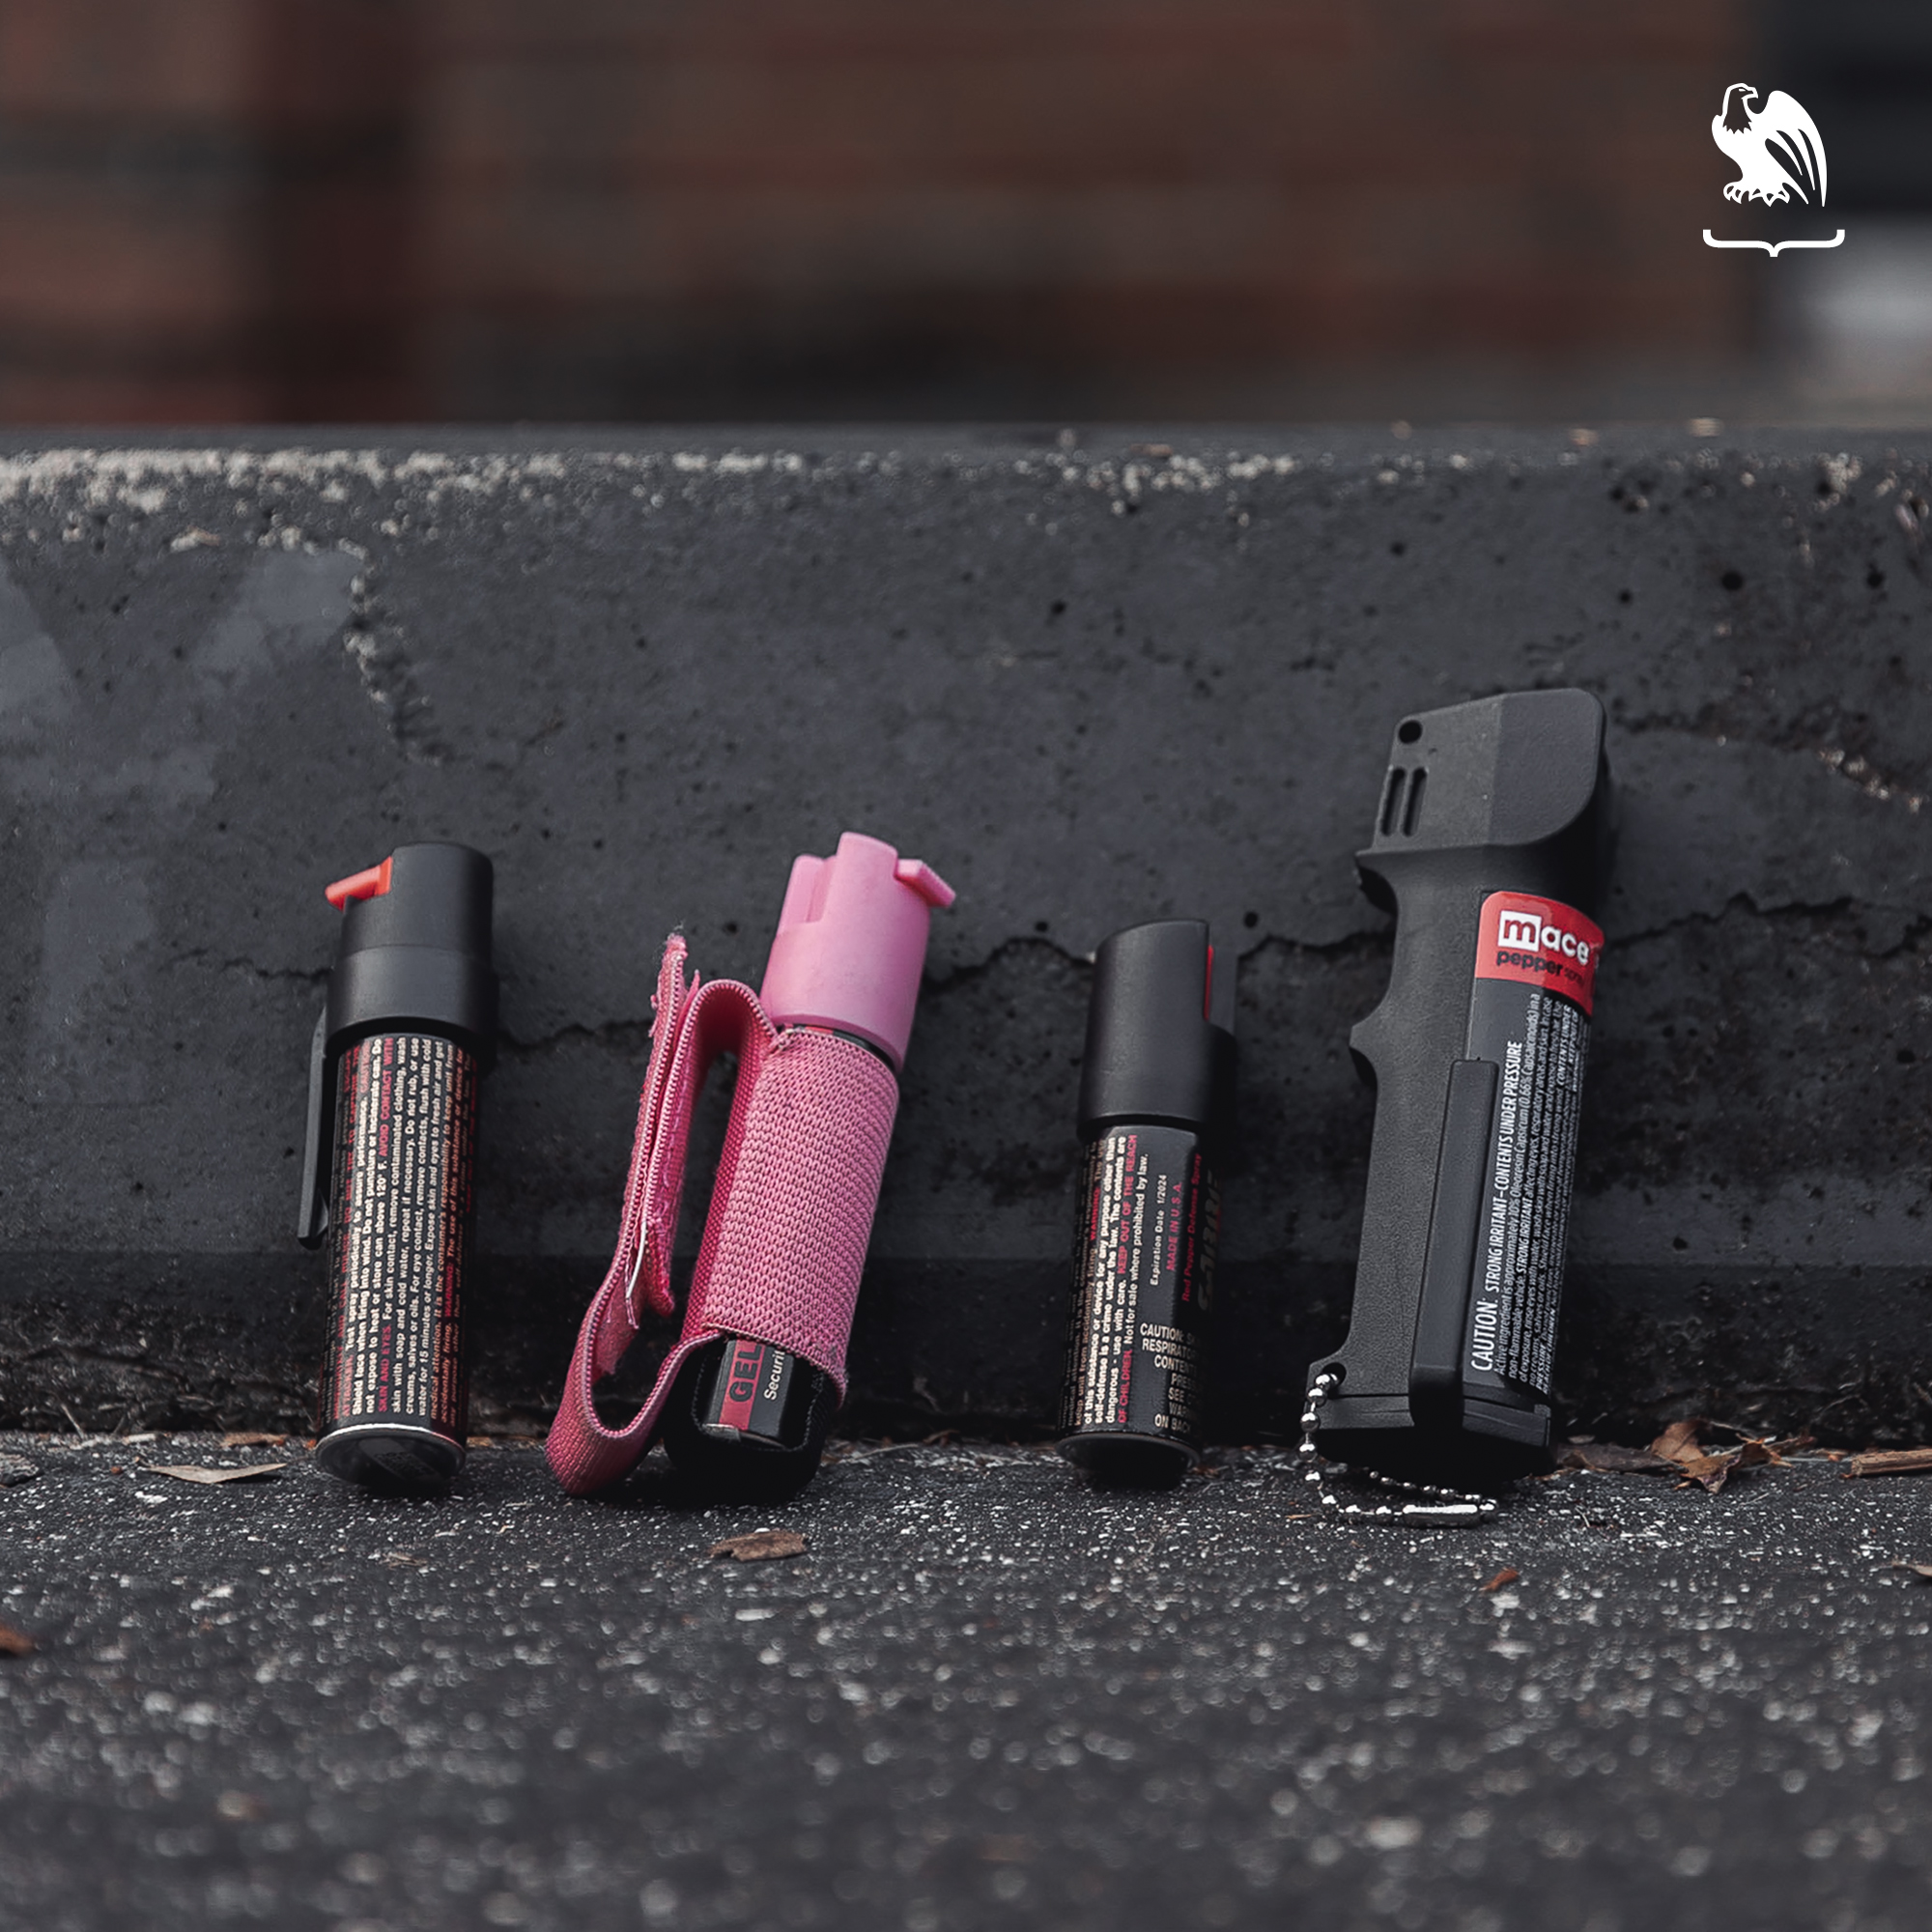 Pros and Cons of Pepper Sprays - Array of different brands and types of Pepper Spray